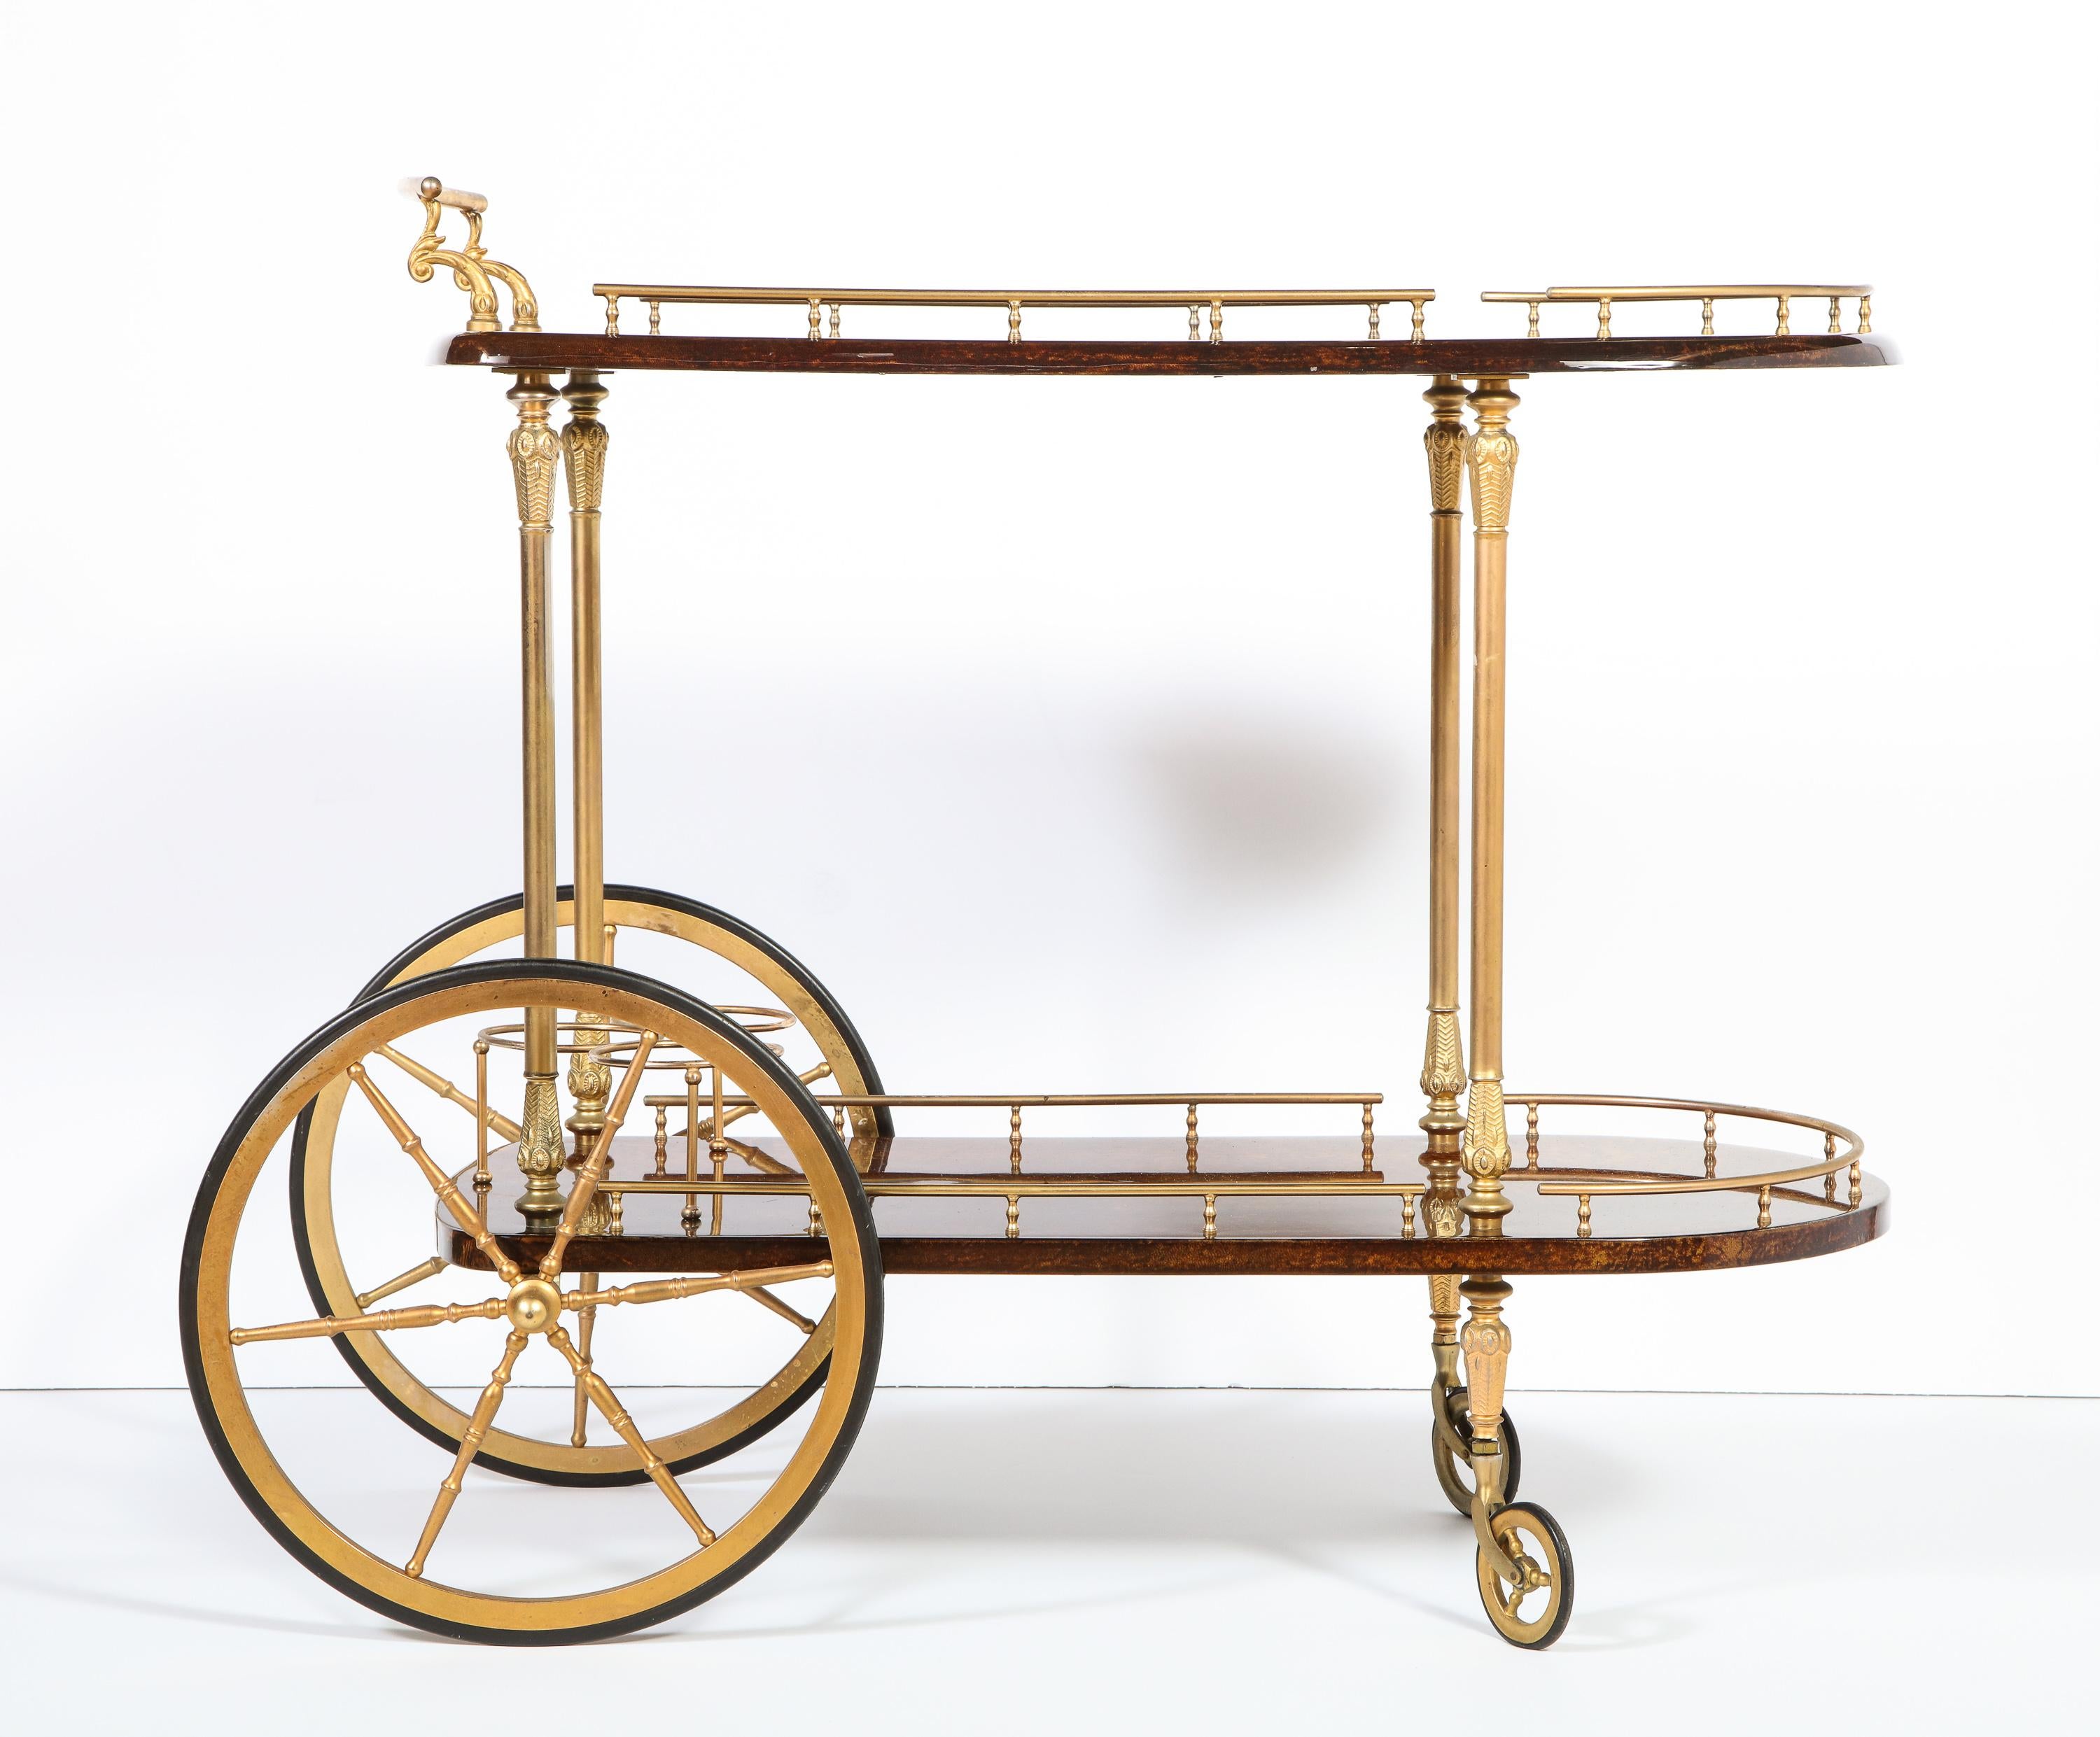 Decorative Aldo Tura lacquered goatskin parchment two level bar cart trolley with brass detailing, Italy, circa 1950. Chocolate color.